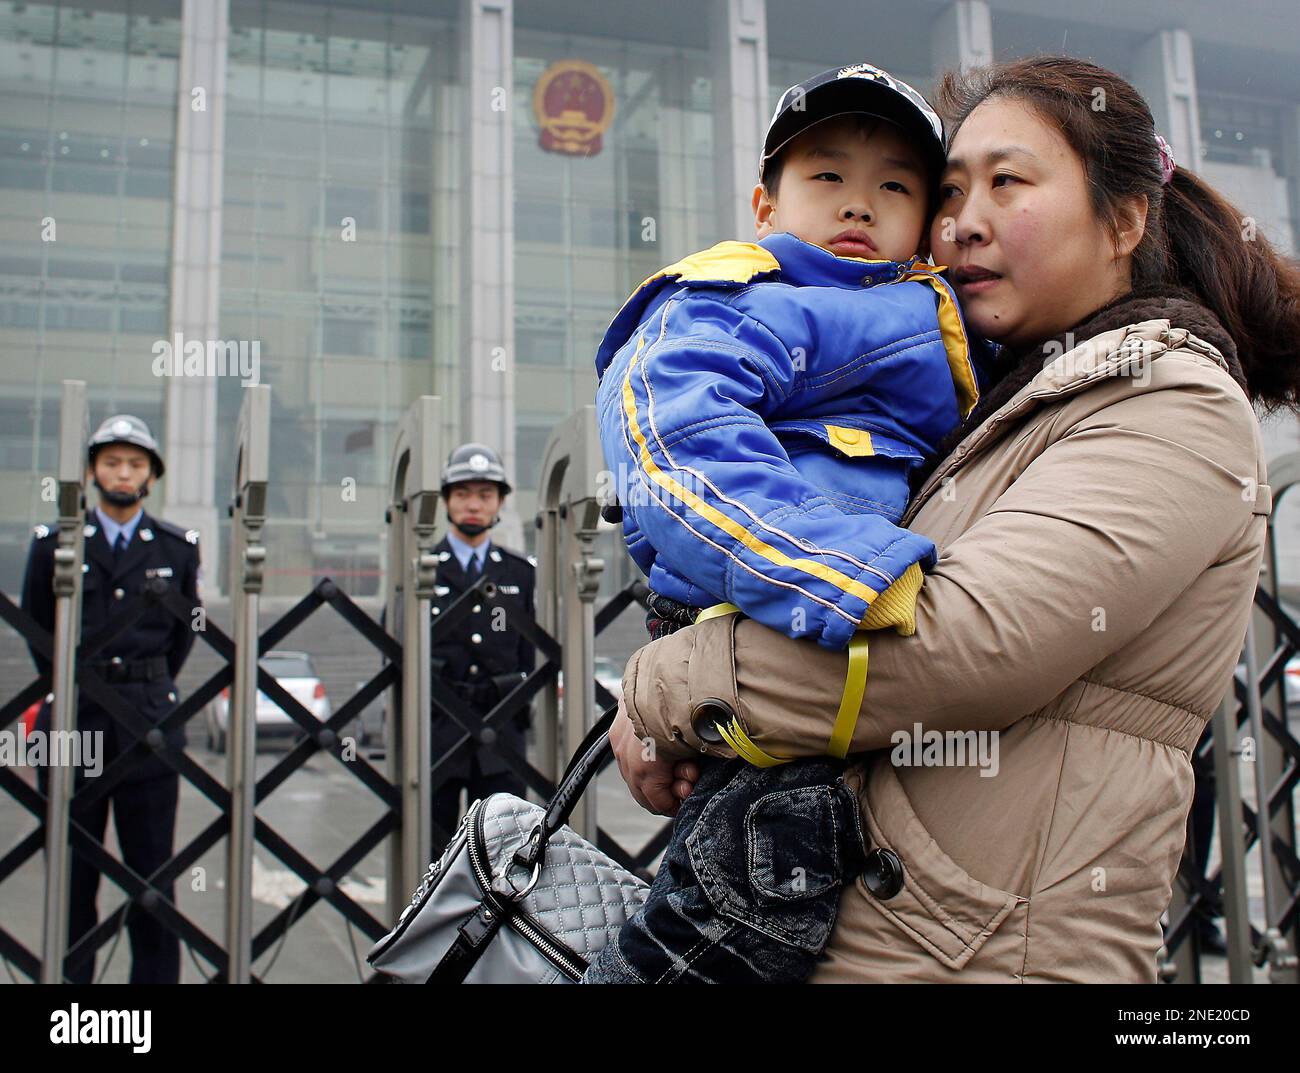 Li Xuemei, wife of Zhao Lianhai, with her son stand outside a court house as she is not allowed to enter to see her husband during a trial case in Beijing, Tuesday, March 30, 2010. Zhao Lianhai, who organized a support group for parents of children sickened in one of China's worst food safety scandals pleaded not guilty Tuesday to charges of inciting social disorder, his lawyer said. (AP Photo/Andy Wong) Stock Photo